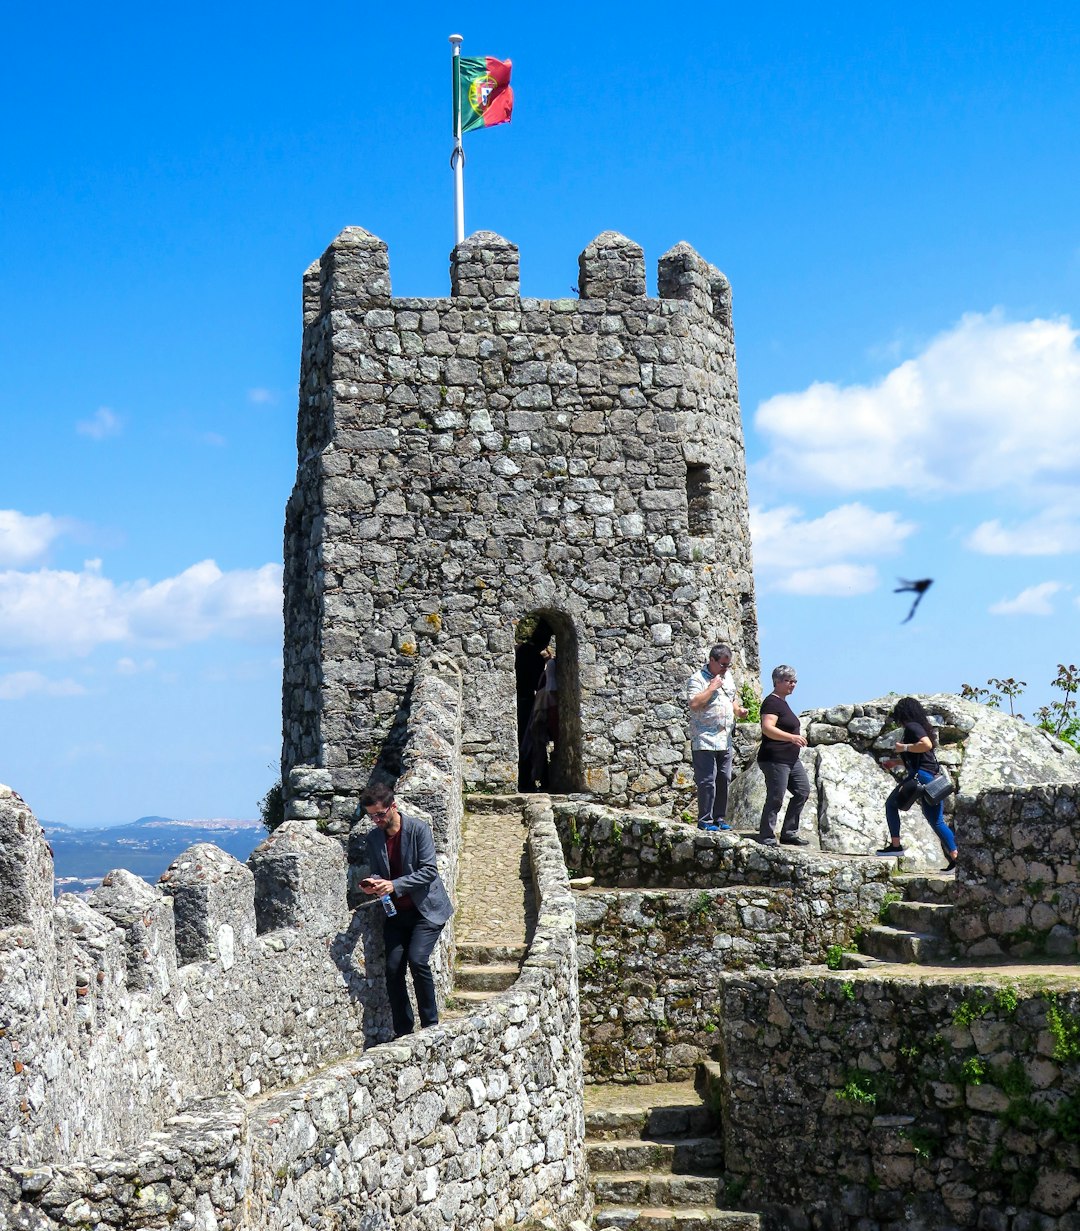 Travel Tips and Stories of Castelo dos Mouros in Portugal